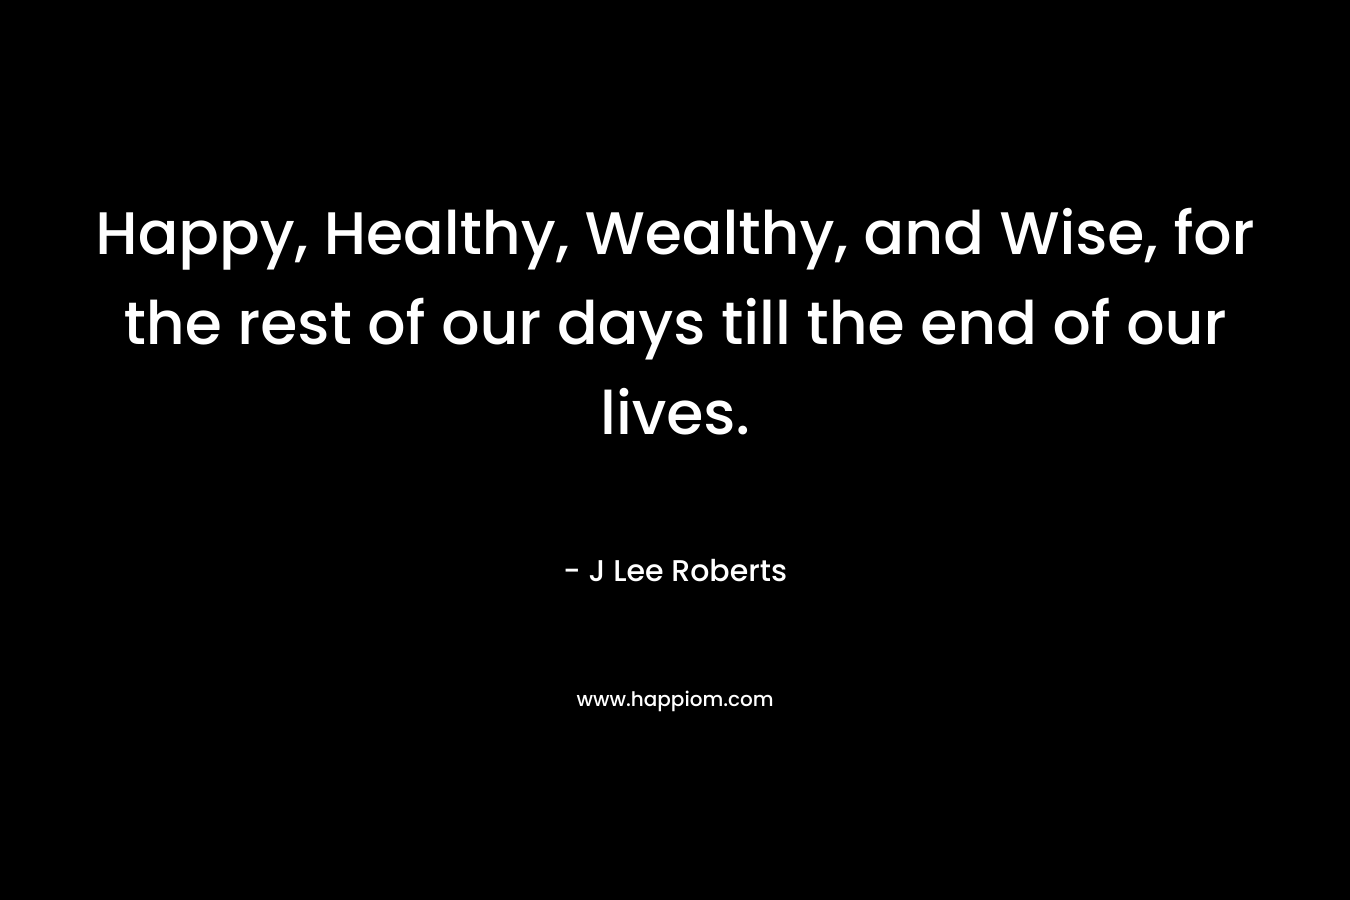 Happy, Healthy, Wealthy, and Wise, for the rest of our days till the end of our lives. – J Lee Roberts